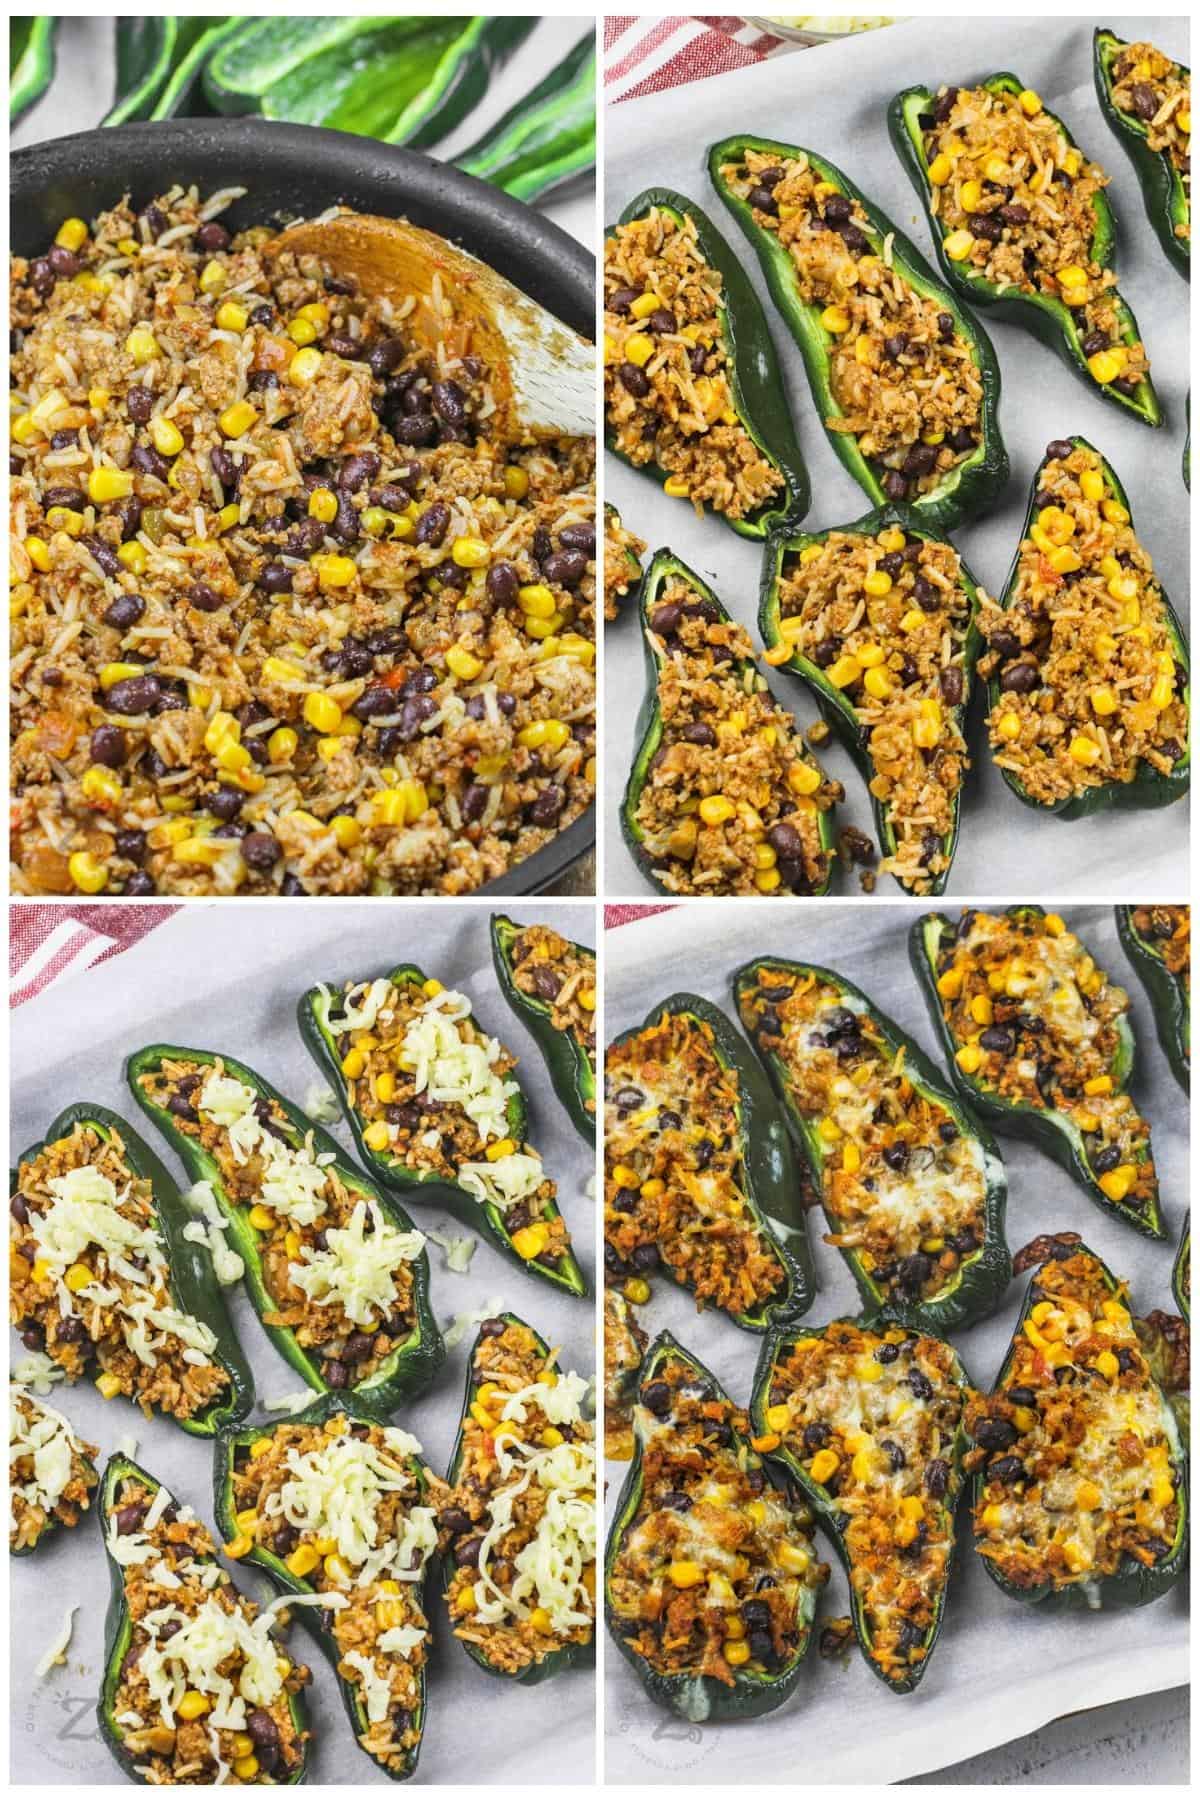 process of adding ingredients together to make Stuffed Poblano Peppers